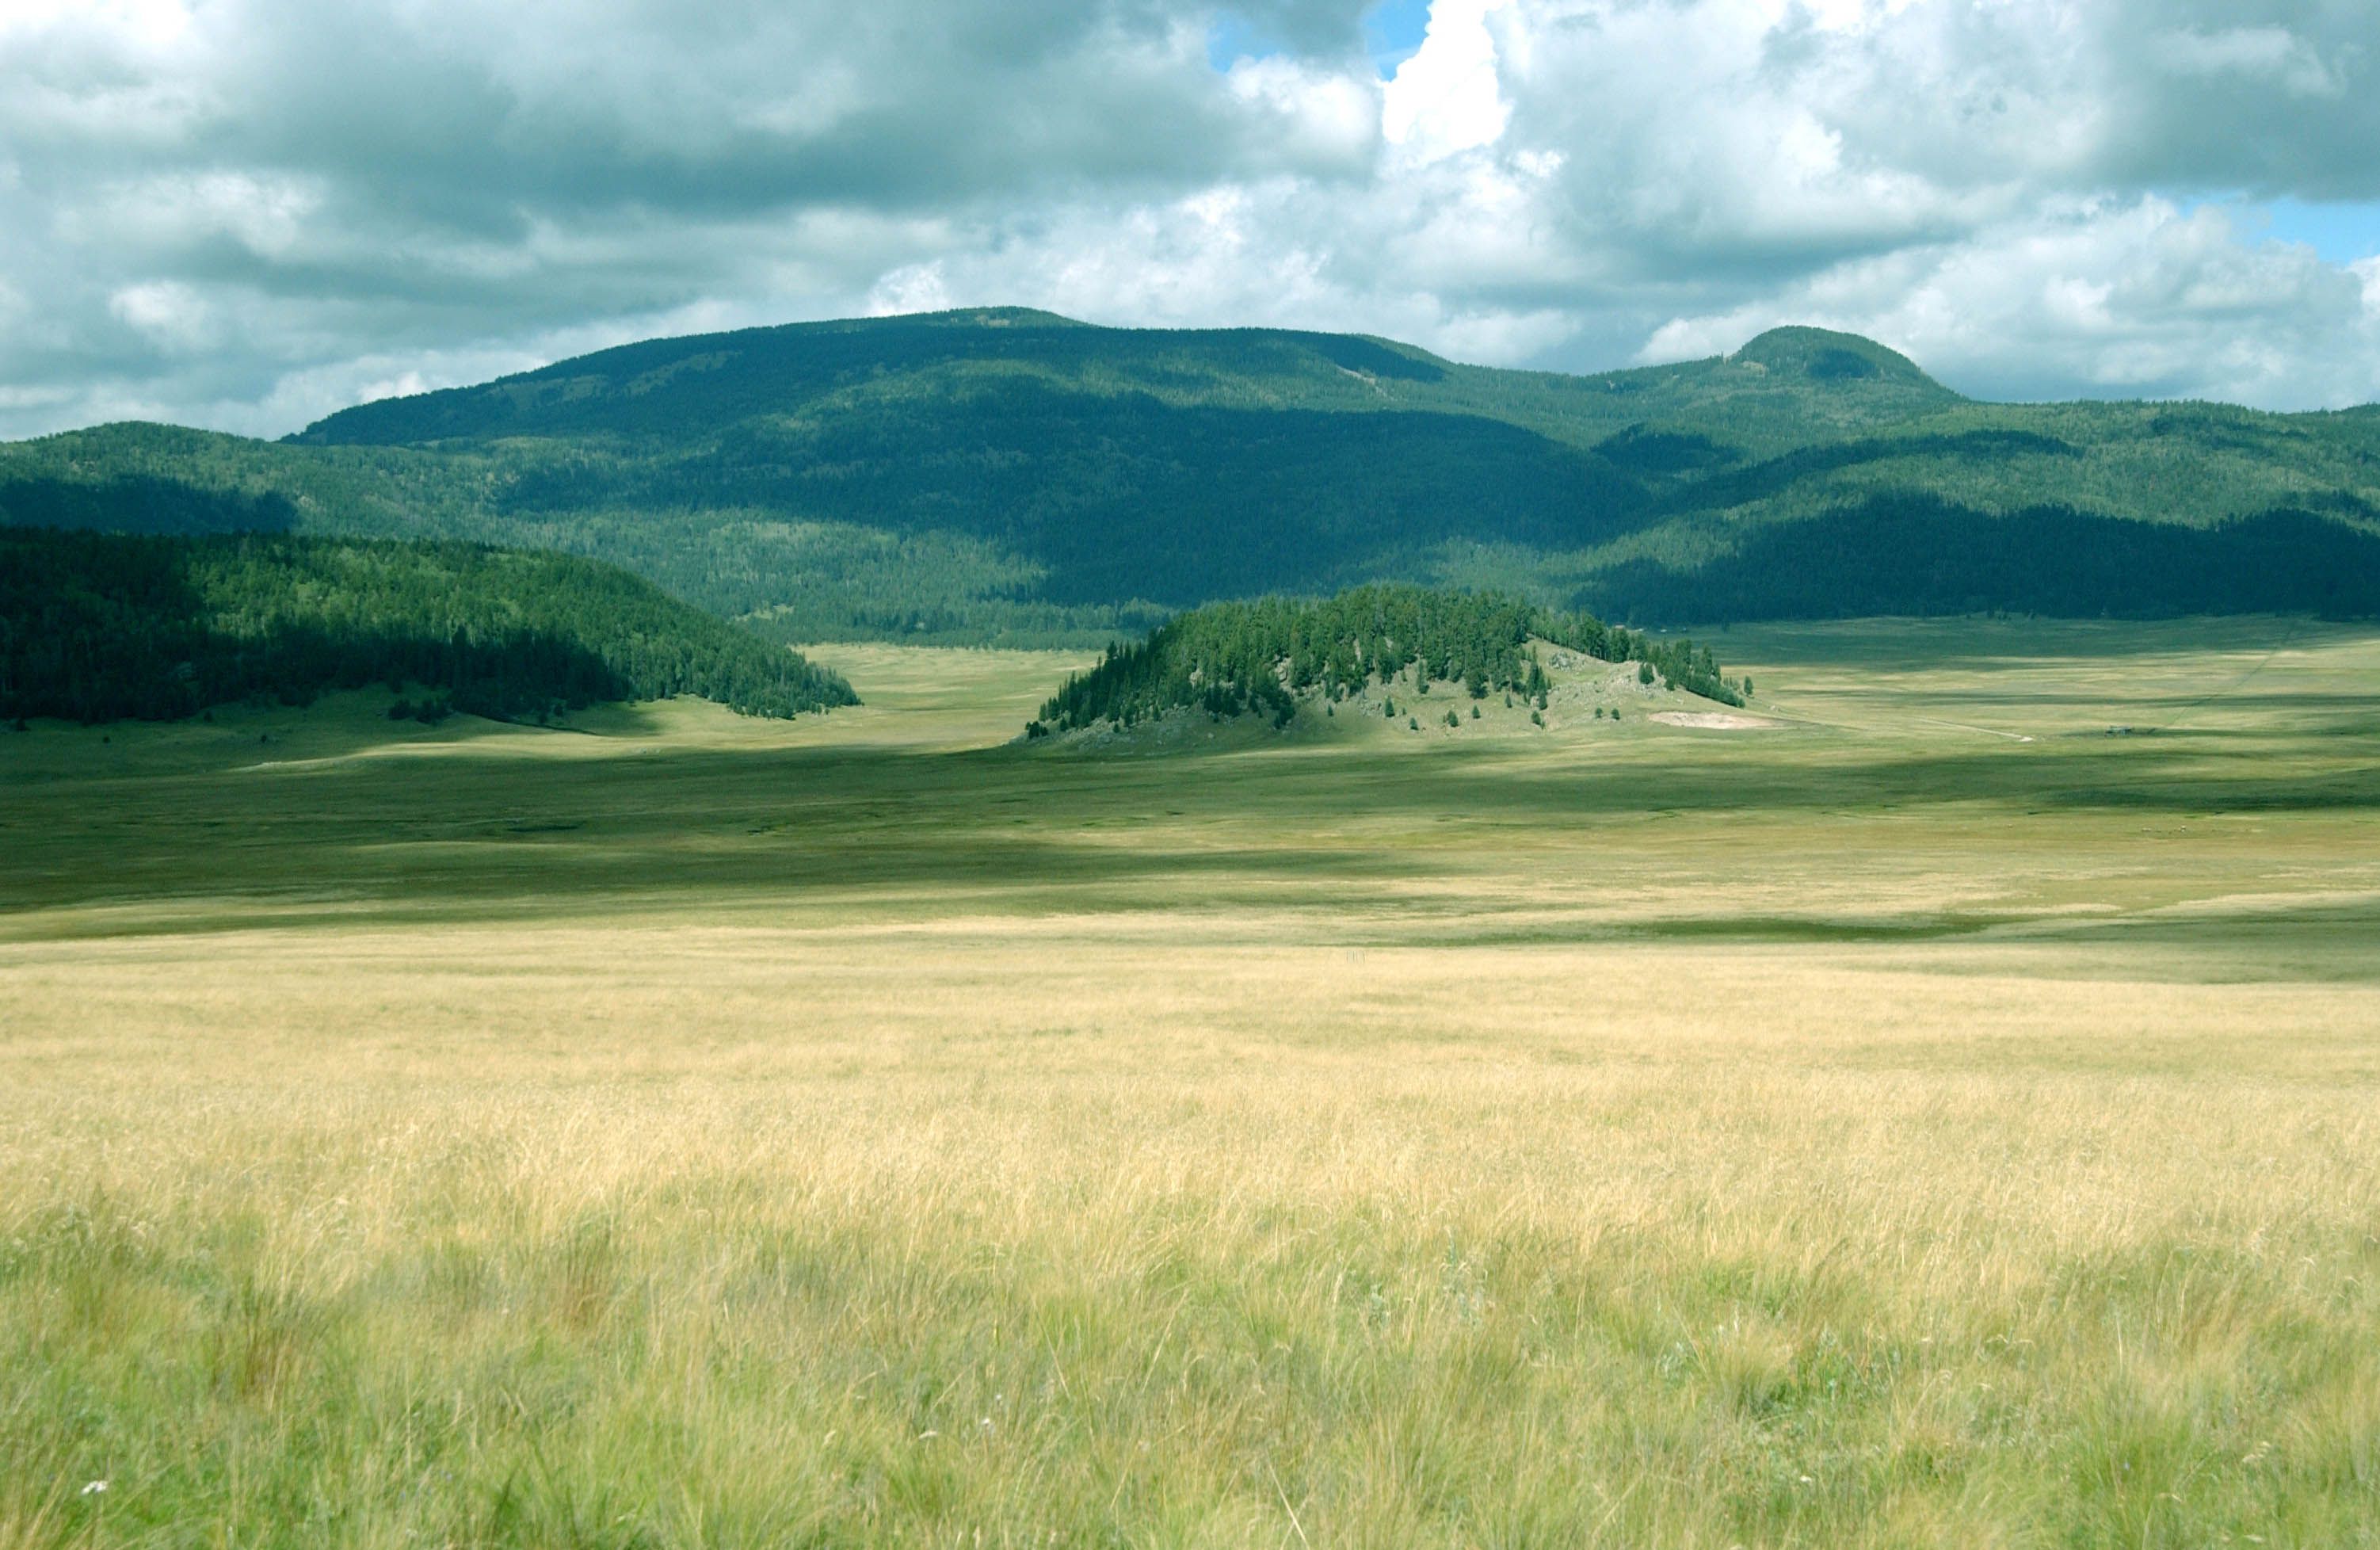 Valles Caldera is a huge volcanic depression on top of a mountain north of Albuquerque